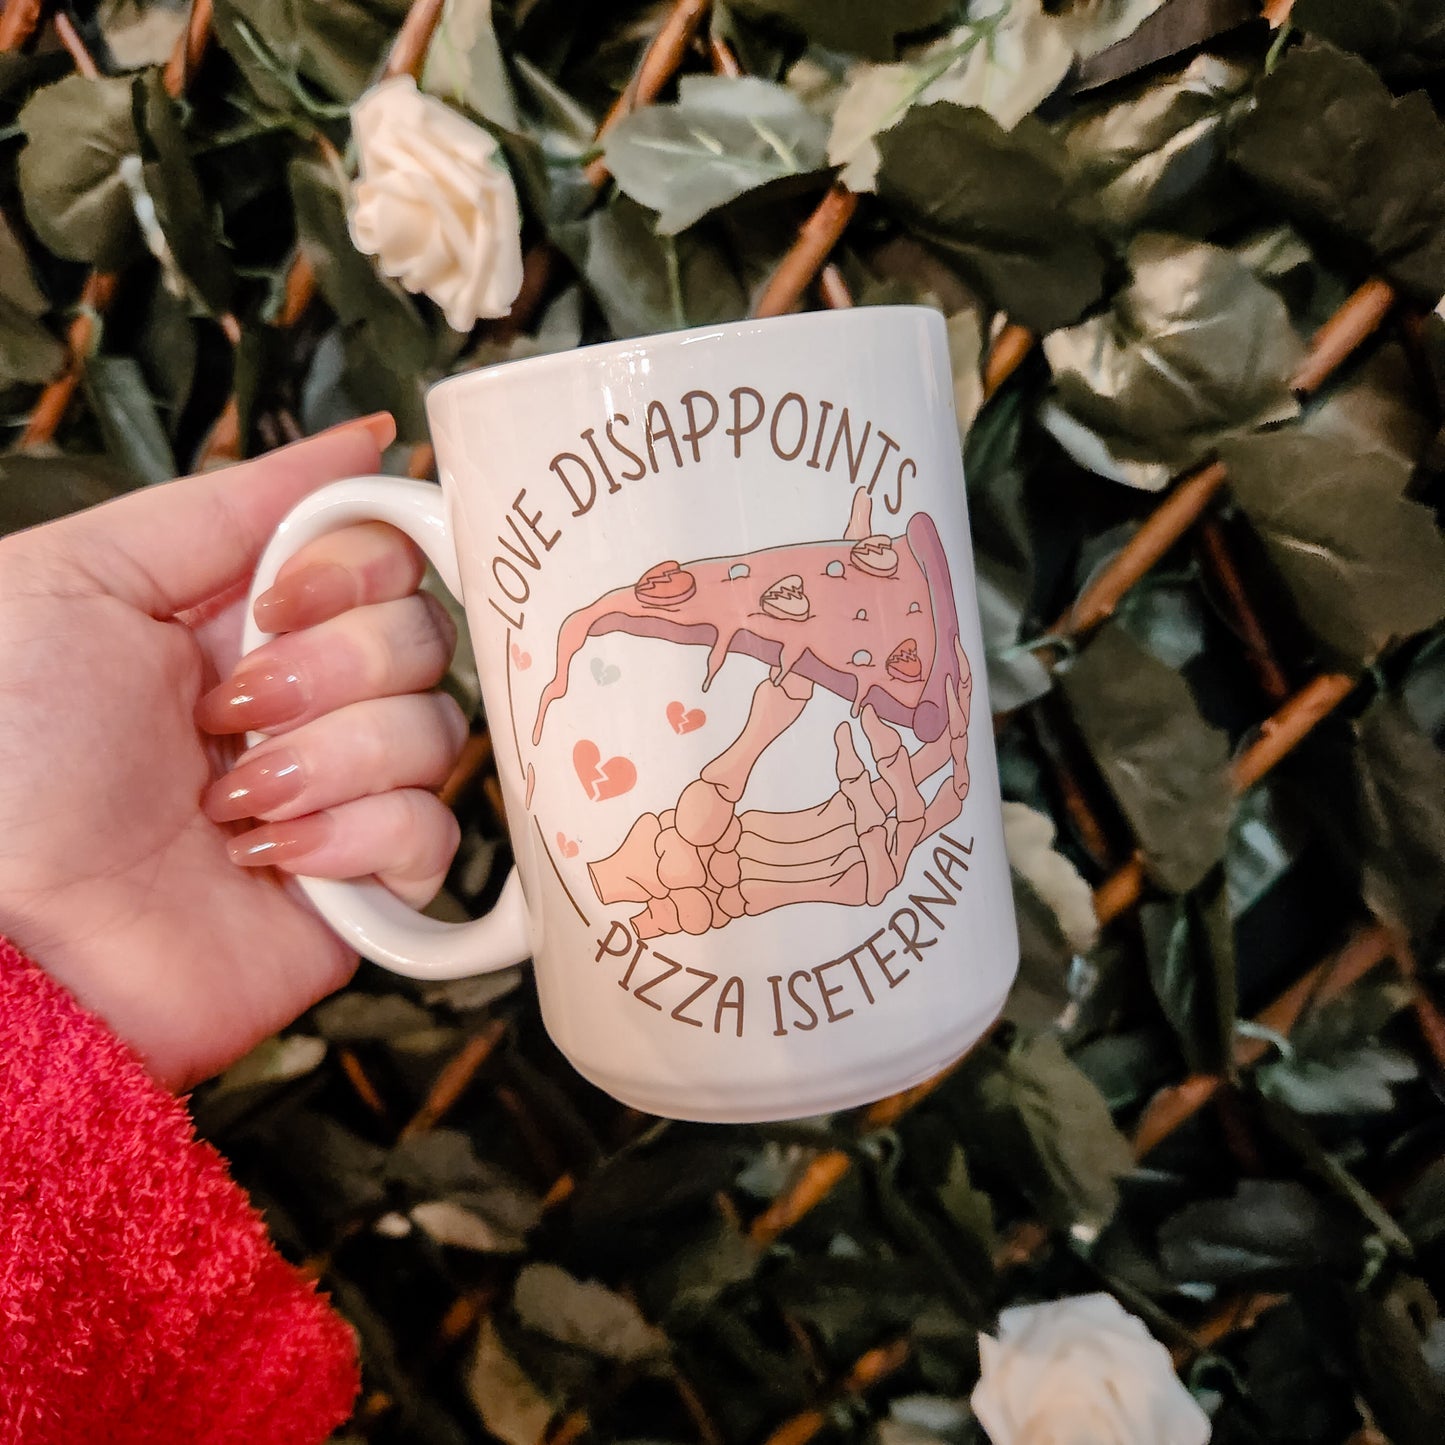 15 oz Love Disappoints Pizza Is Eternal Mug